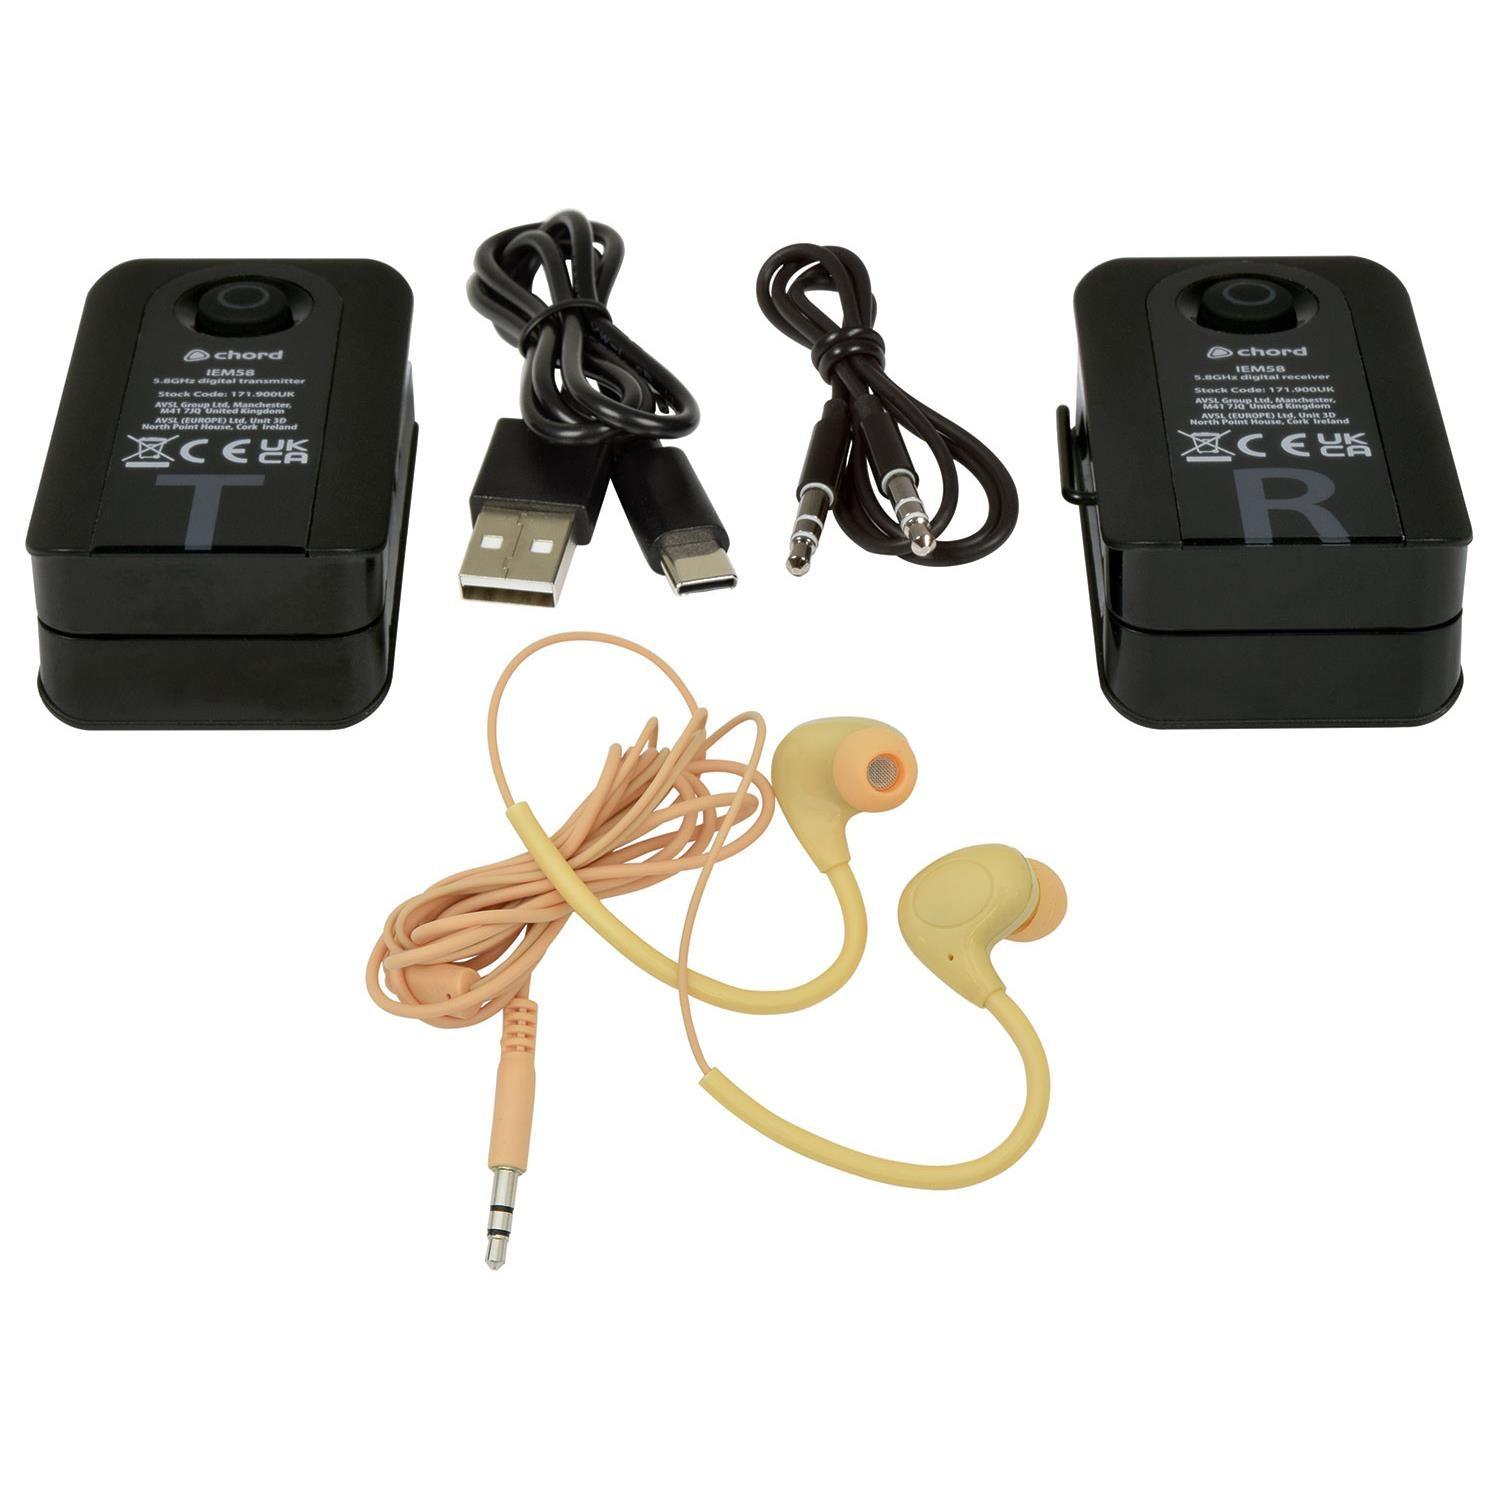 Chord IEM58 Compact 5.8GHz In-Ear Monitoring System - DY Pro Audio